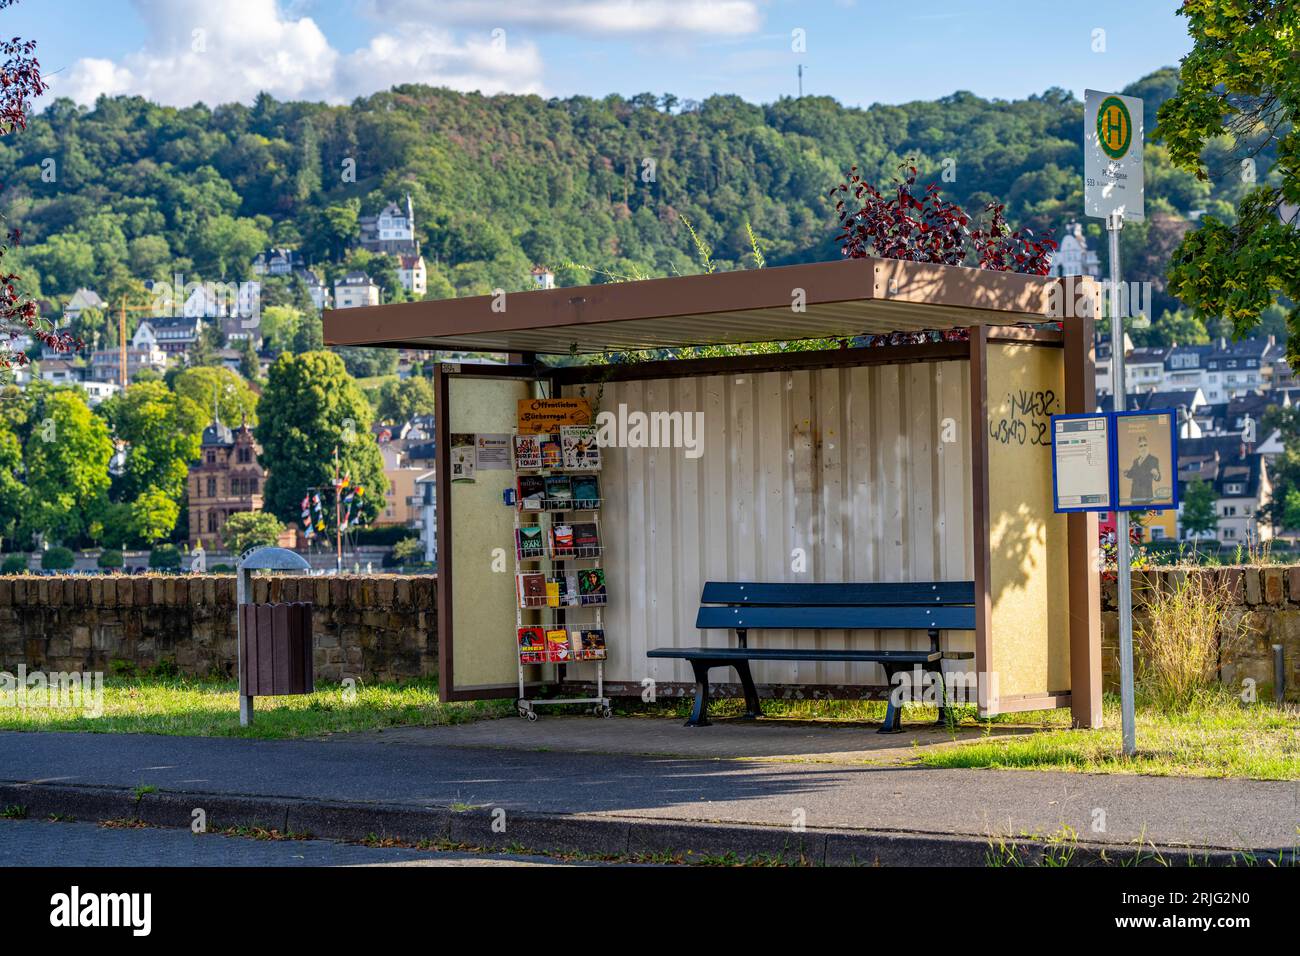 Bus stop in Filsen-Pfaffengasse, in the Upper Middle Rhine Valley, weekdays 3 stops of the local bus service of Verkehrsverbund Rhein-Mosel GmbH, publ Stock Photo